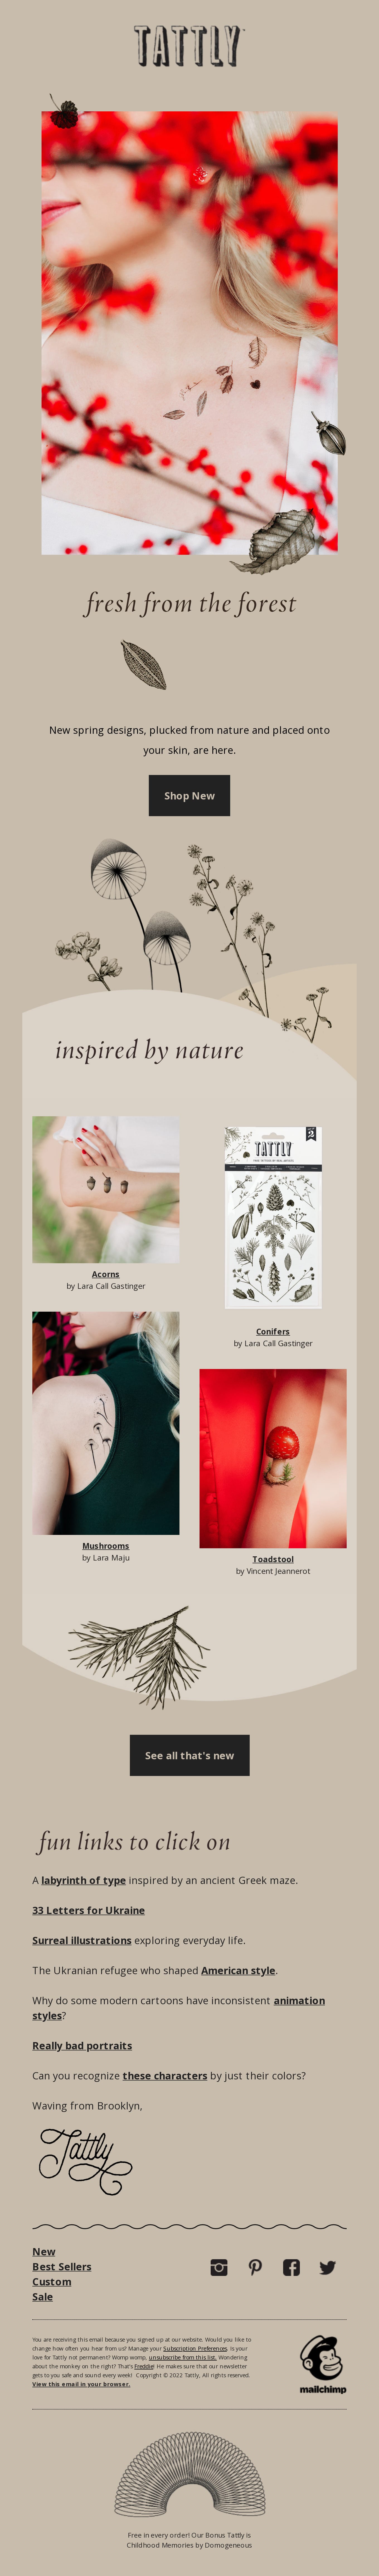 New Tattly Forest Finds Email Screenshot